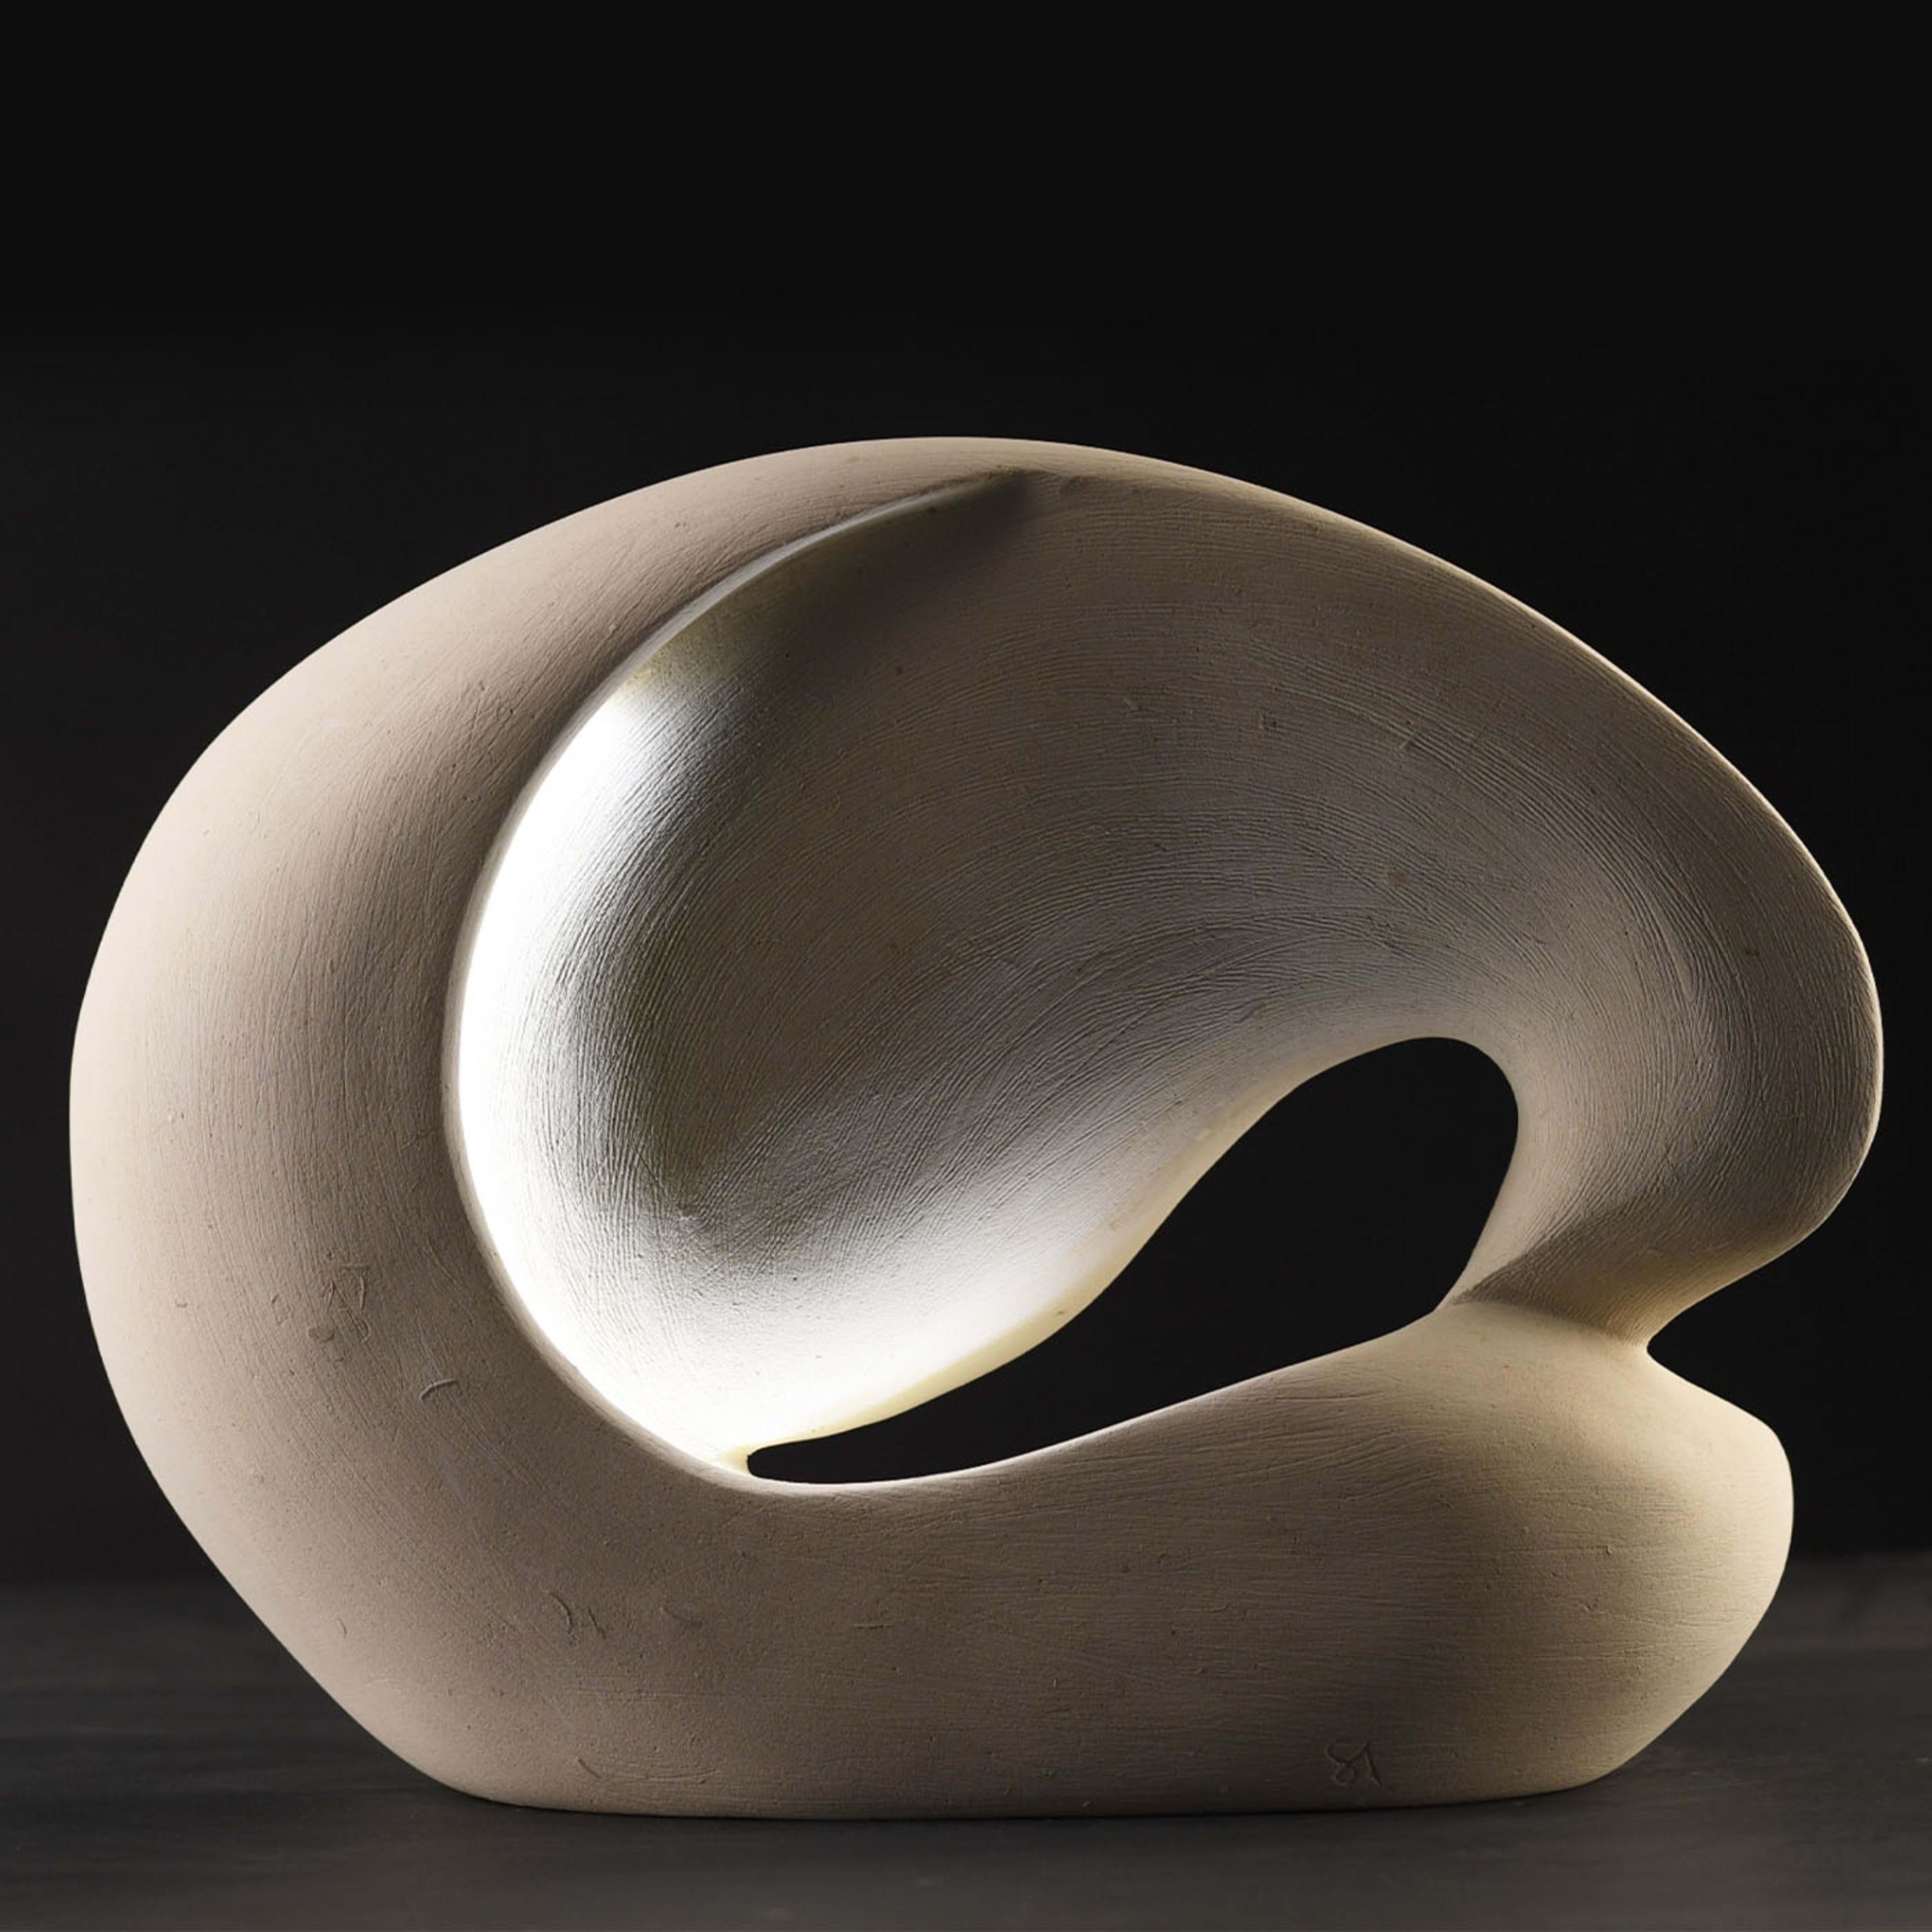 Artist Andrea Serra handcrafted this singular luminous sculpture with the delicate beauty of dawn light in mind. Its sinuous silhouette is fashioned of a special marine-origin stone, naturally bright and rich in fossils, that can only be quarried in